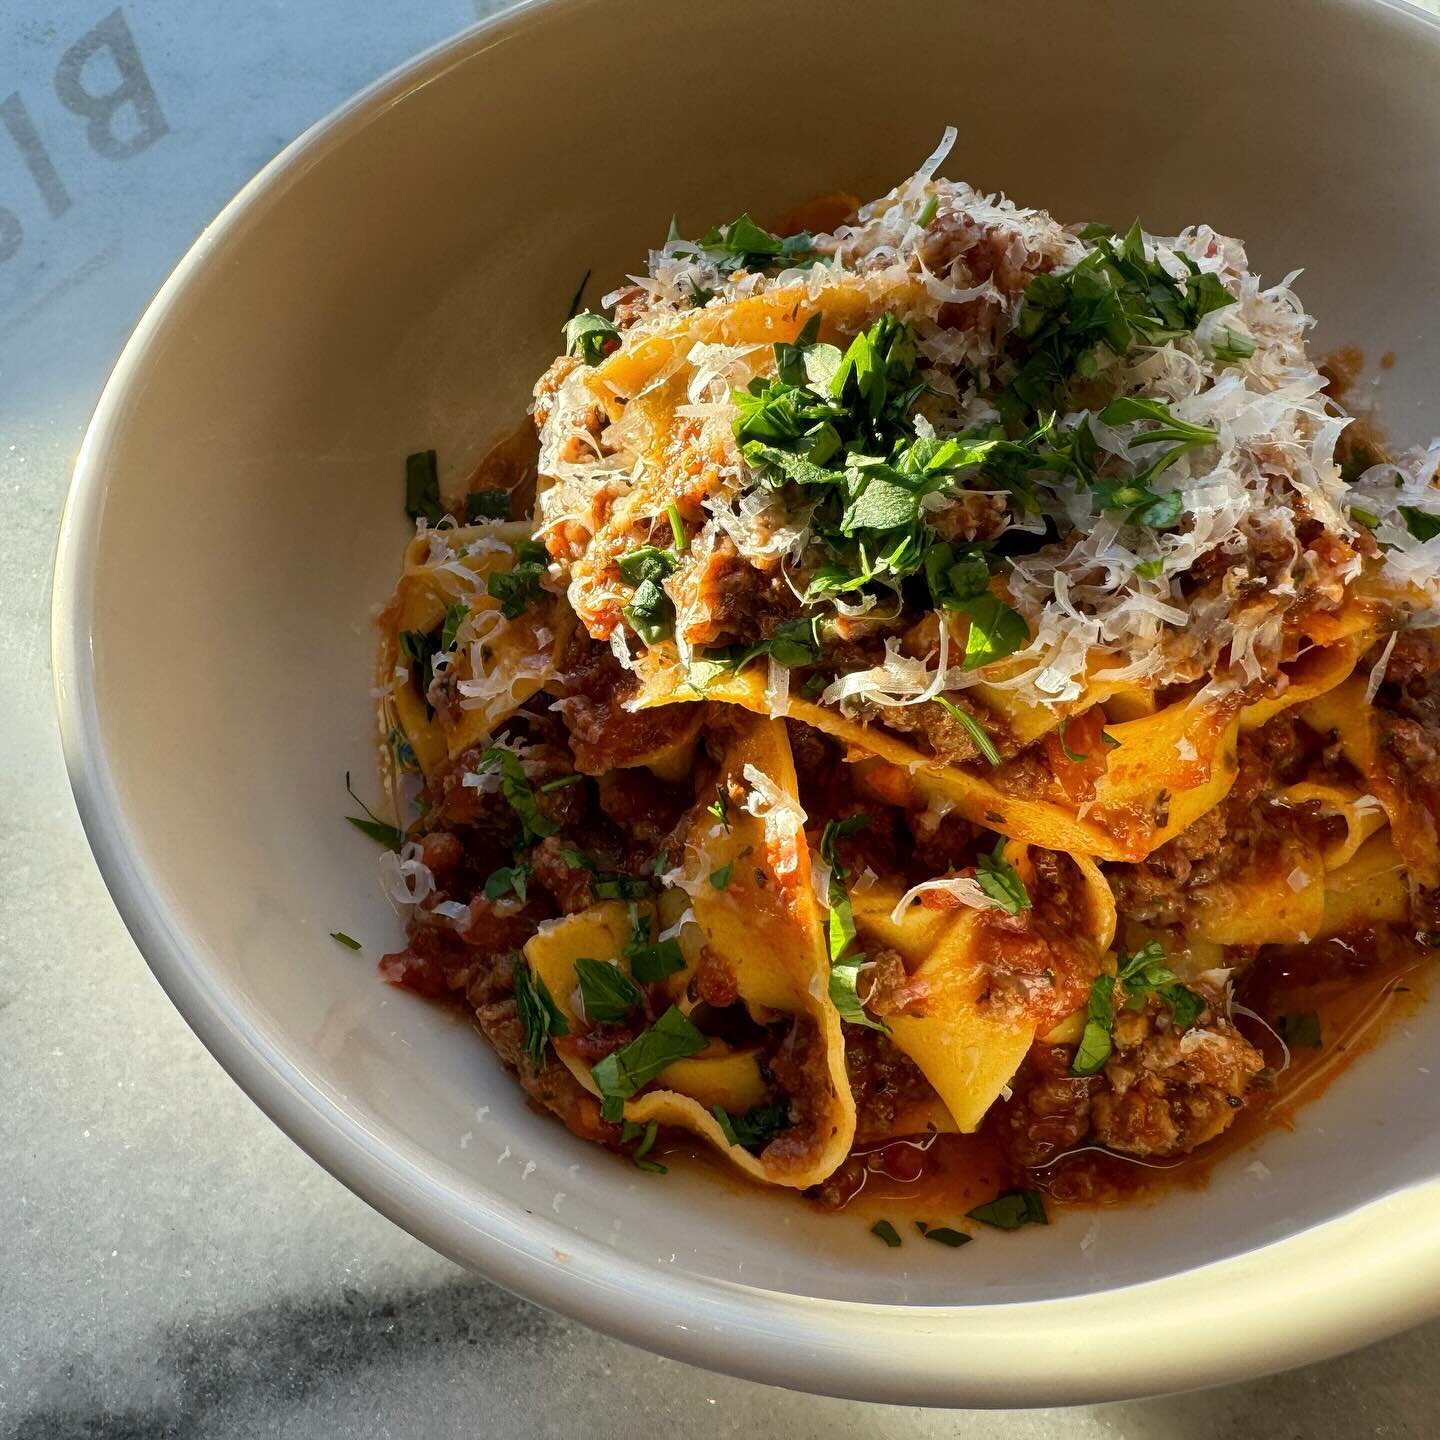 How does a bowl of saucy handmade tagliatelle al rag&ugrave; bolognese sound? Come join us for one questa sera - we&rsquo;d love to welcome you! 😍
.
.
.
.
.
#pasta&nbsp;#cucinaitaliana&nbsp;#lowergreenvillerestaurants&nbsp;#lowestgreenville&nbsp;#Da